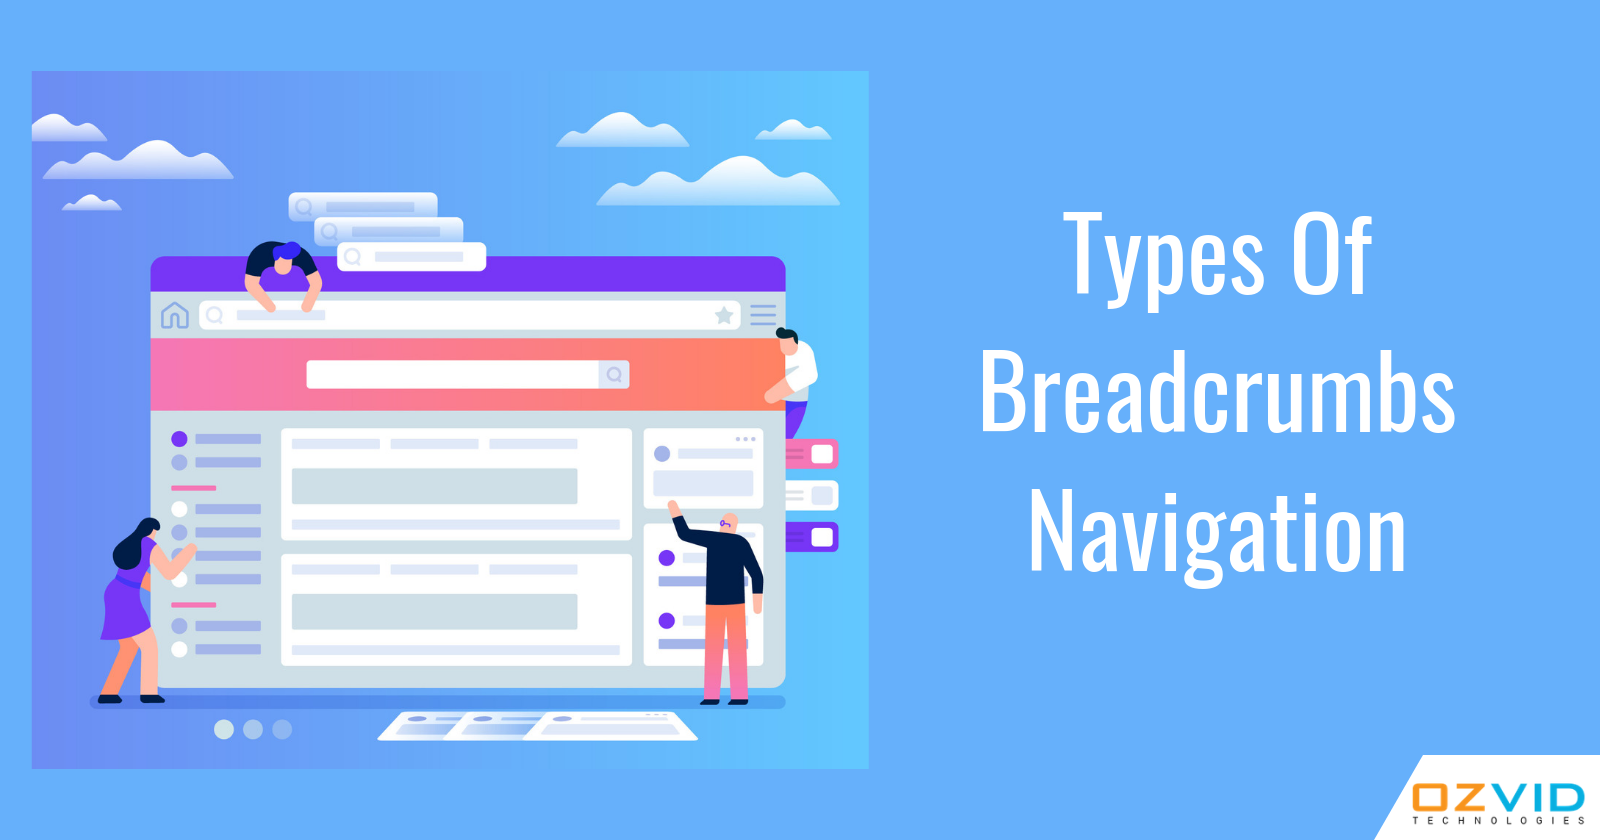 Know About Different Types of Breadcrumbs Navigation